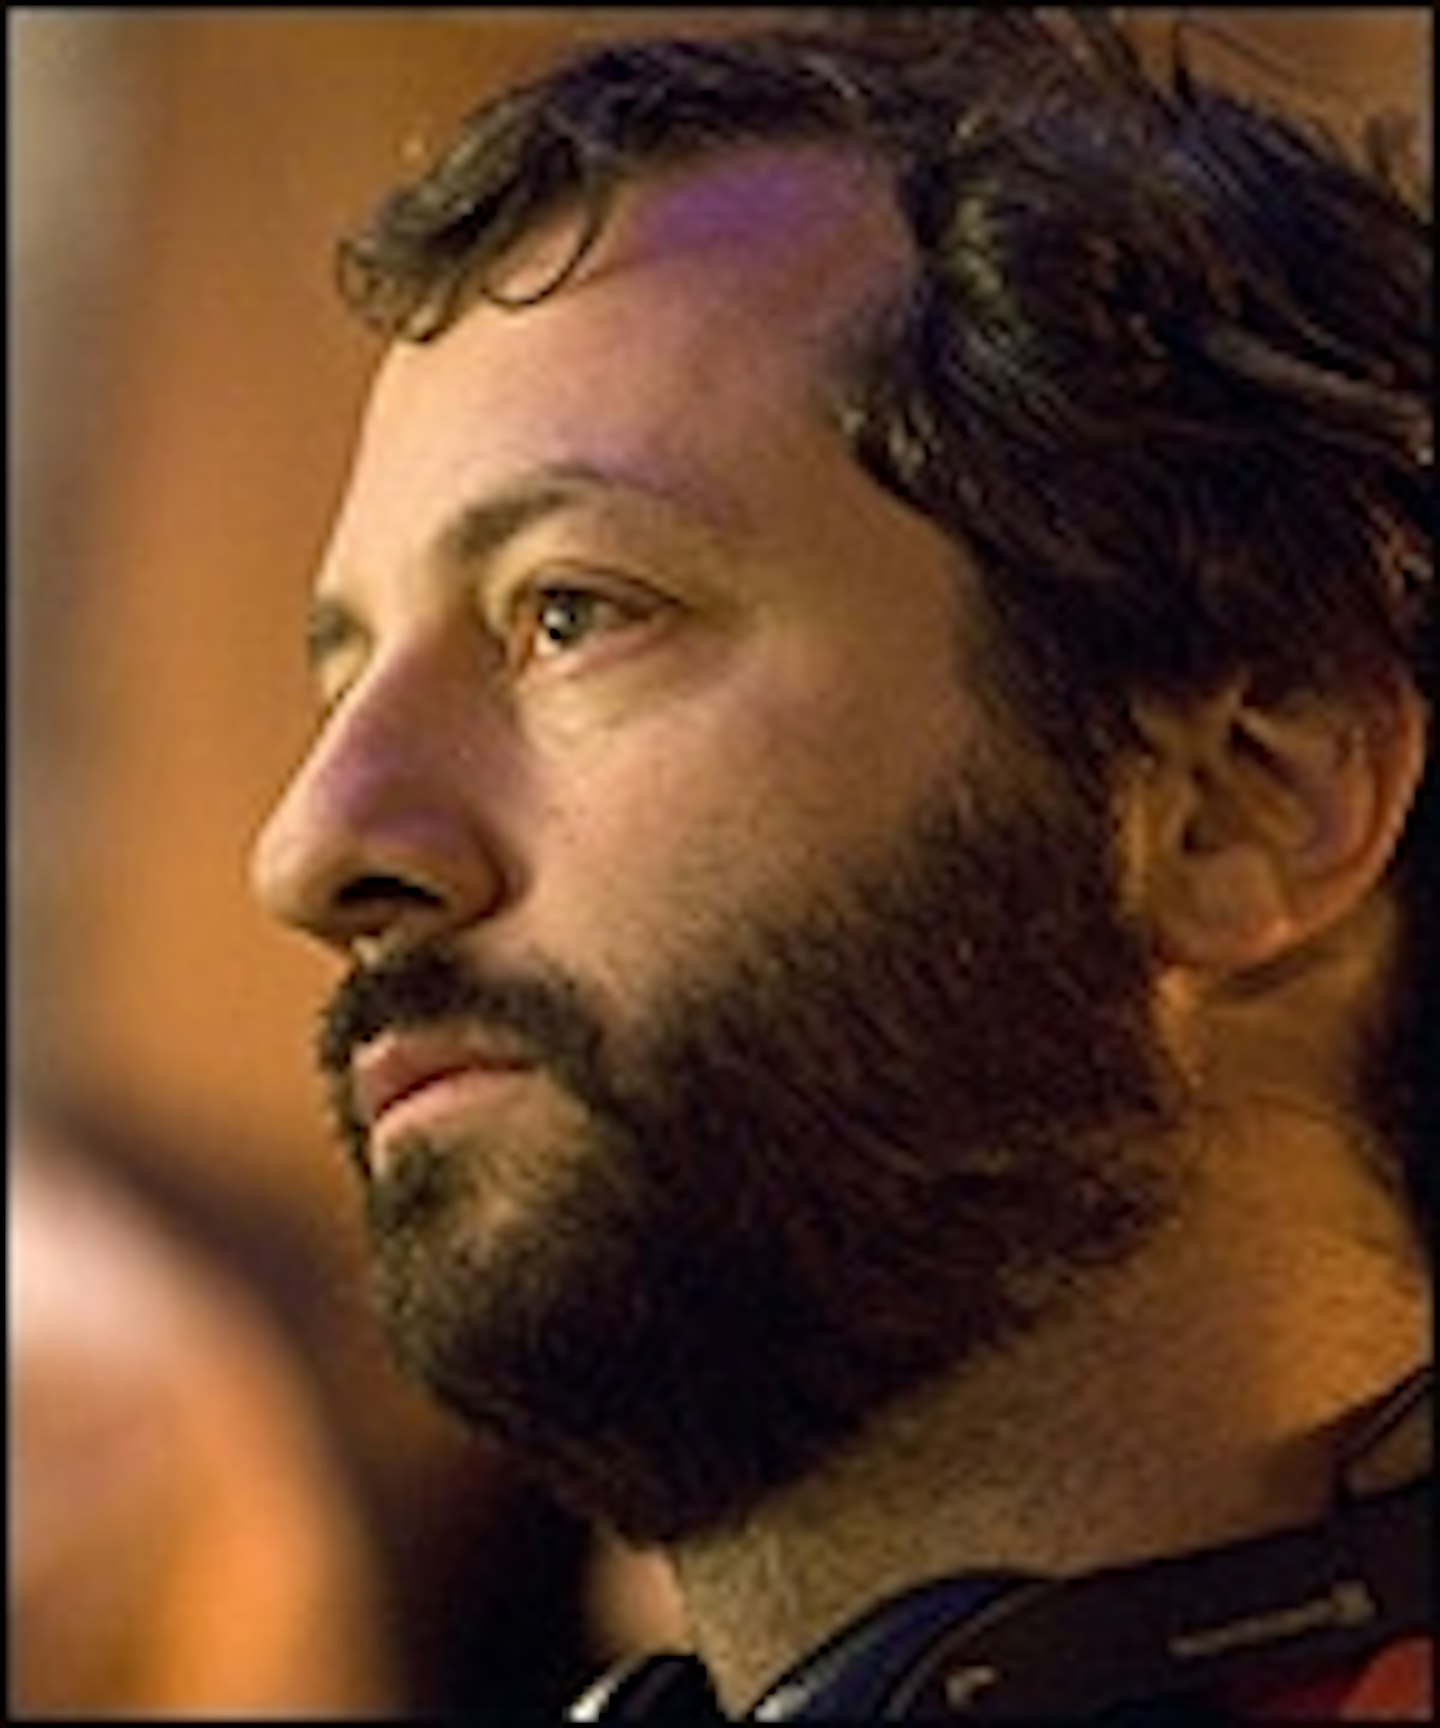 Judd Apatow Targets Do-Gooders